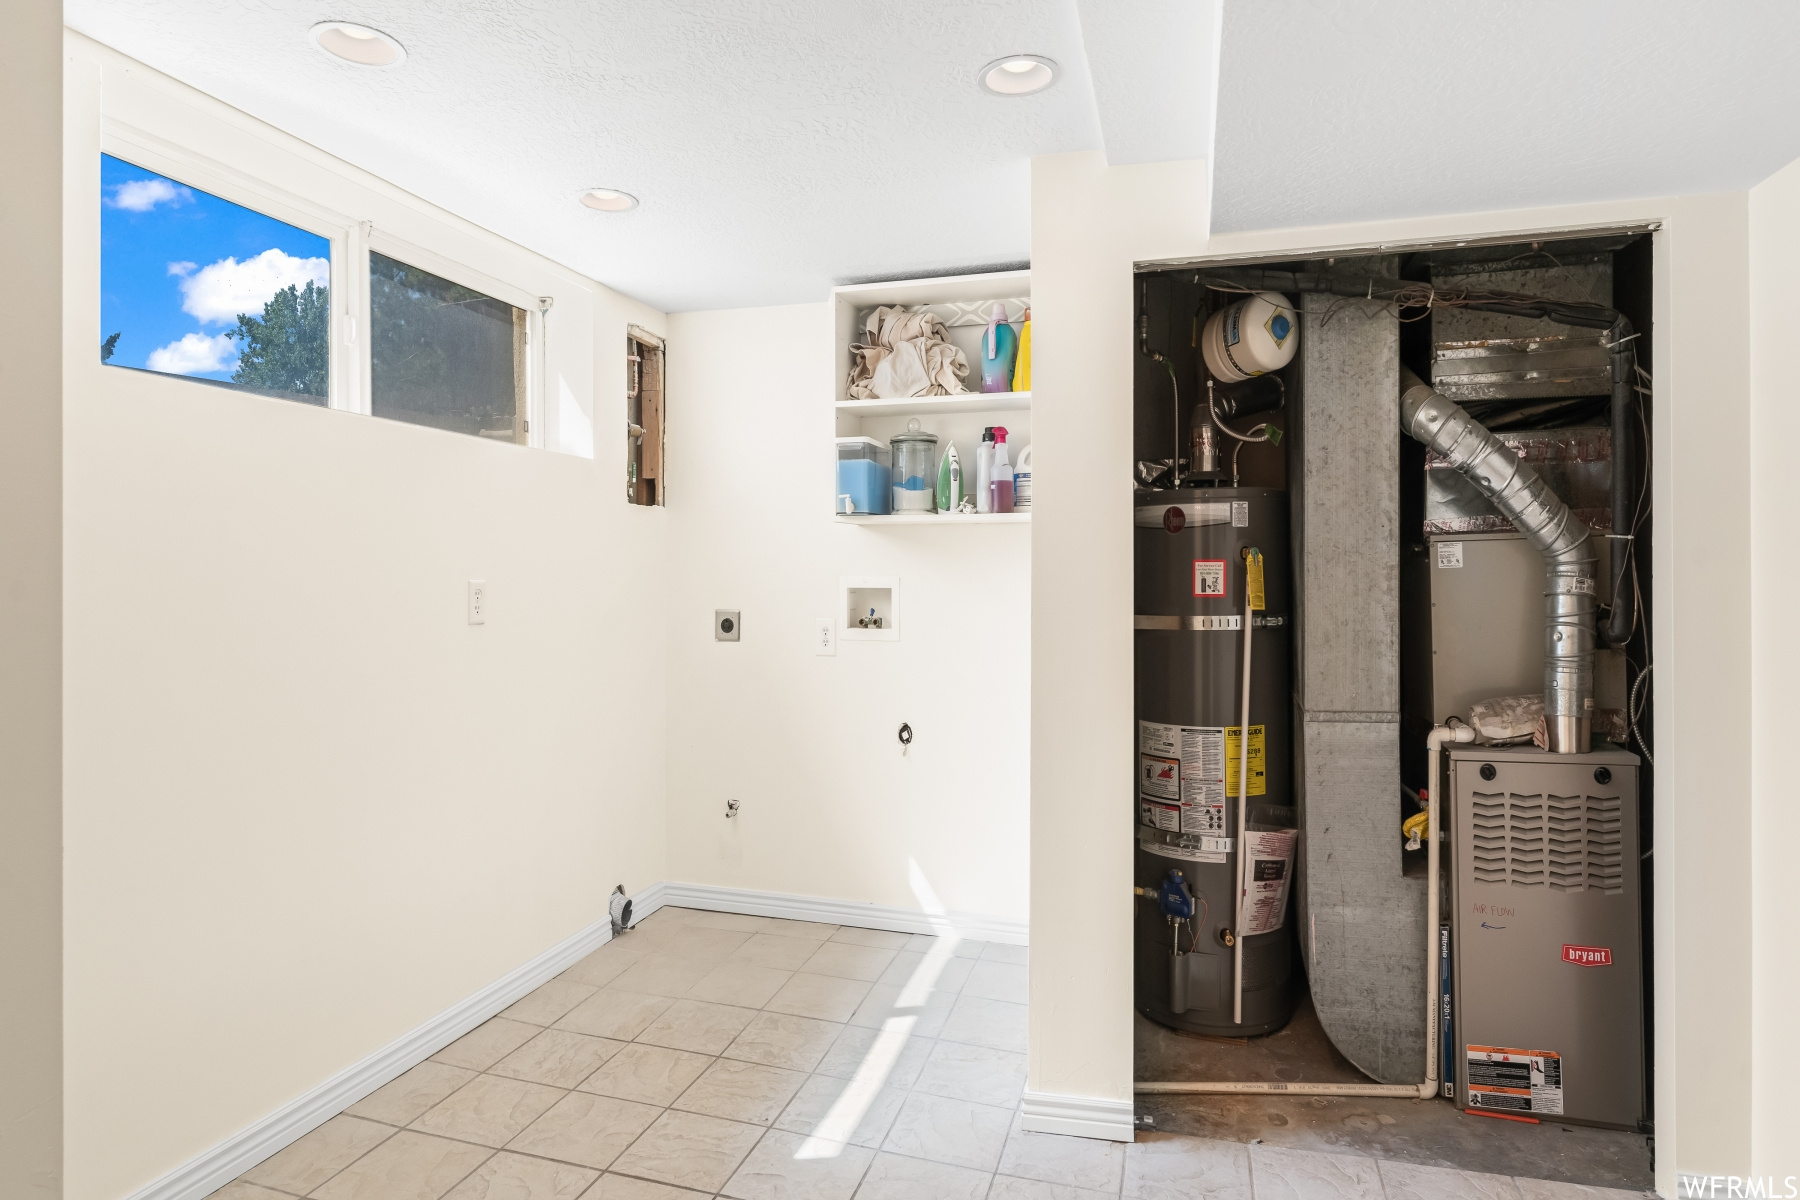 Utility room/Laundry area featuring gas water heater